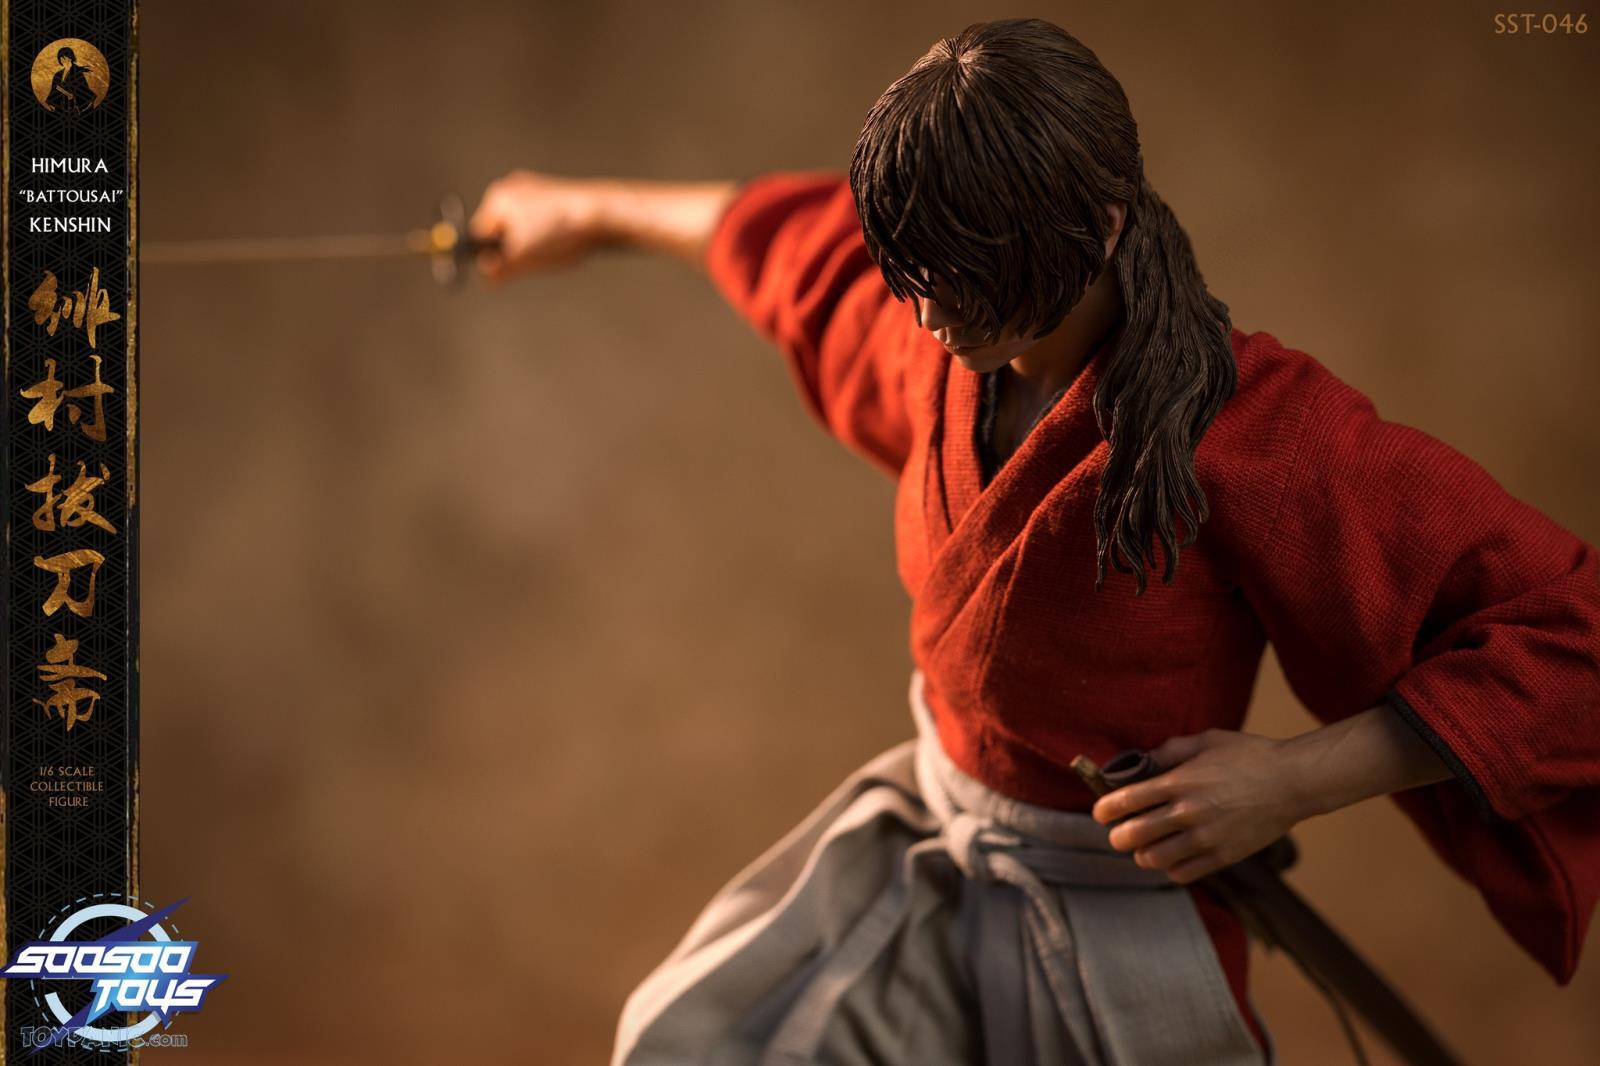 japanese - NEW PRODUCT: 1/6 scale Rurouni Kenshin Collectible Figure from SooSooToys 712202251229PM_9557183